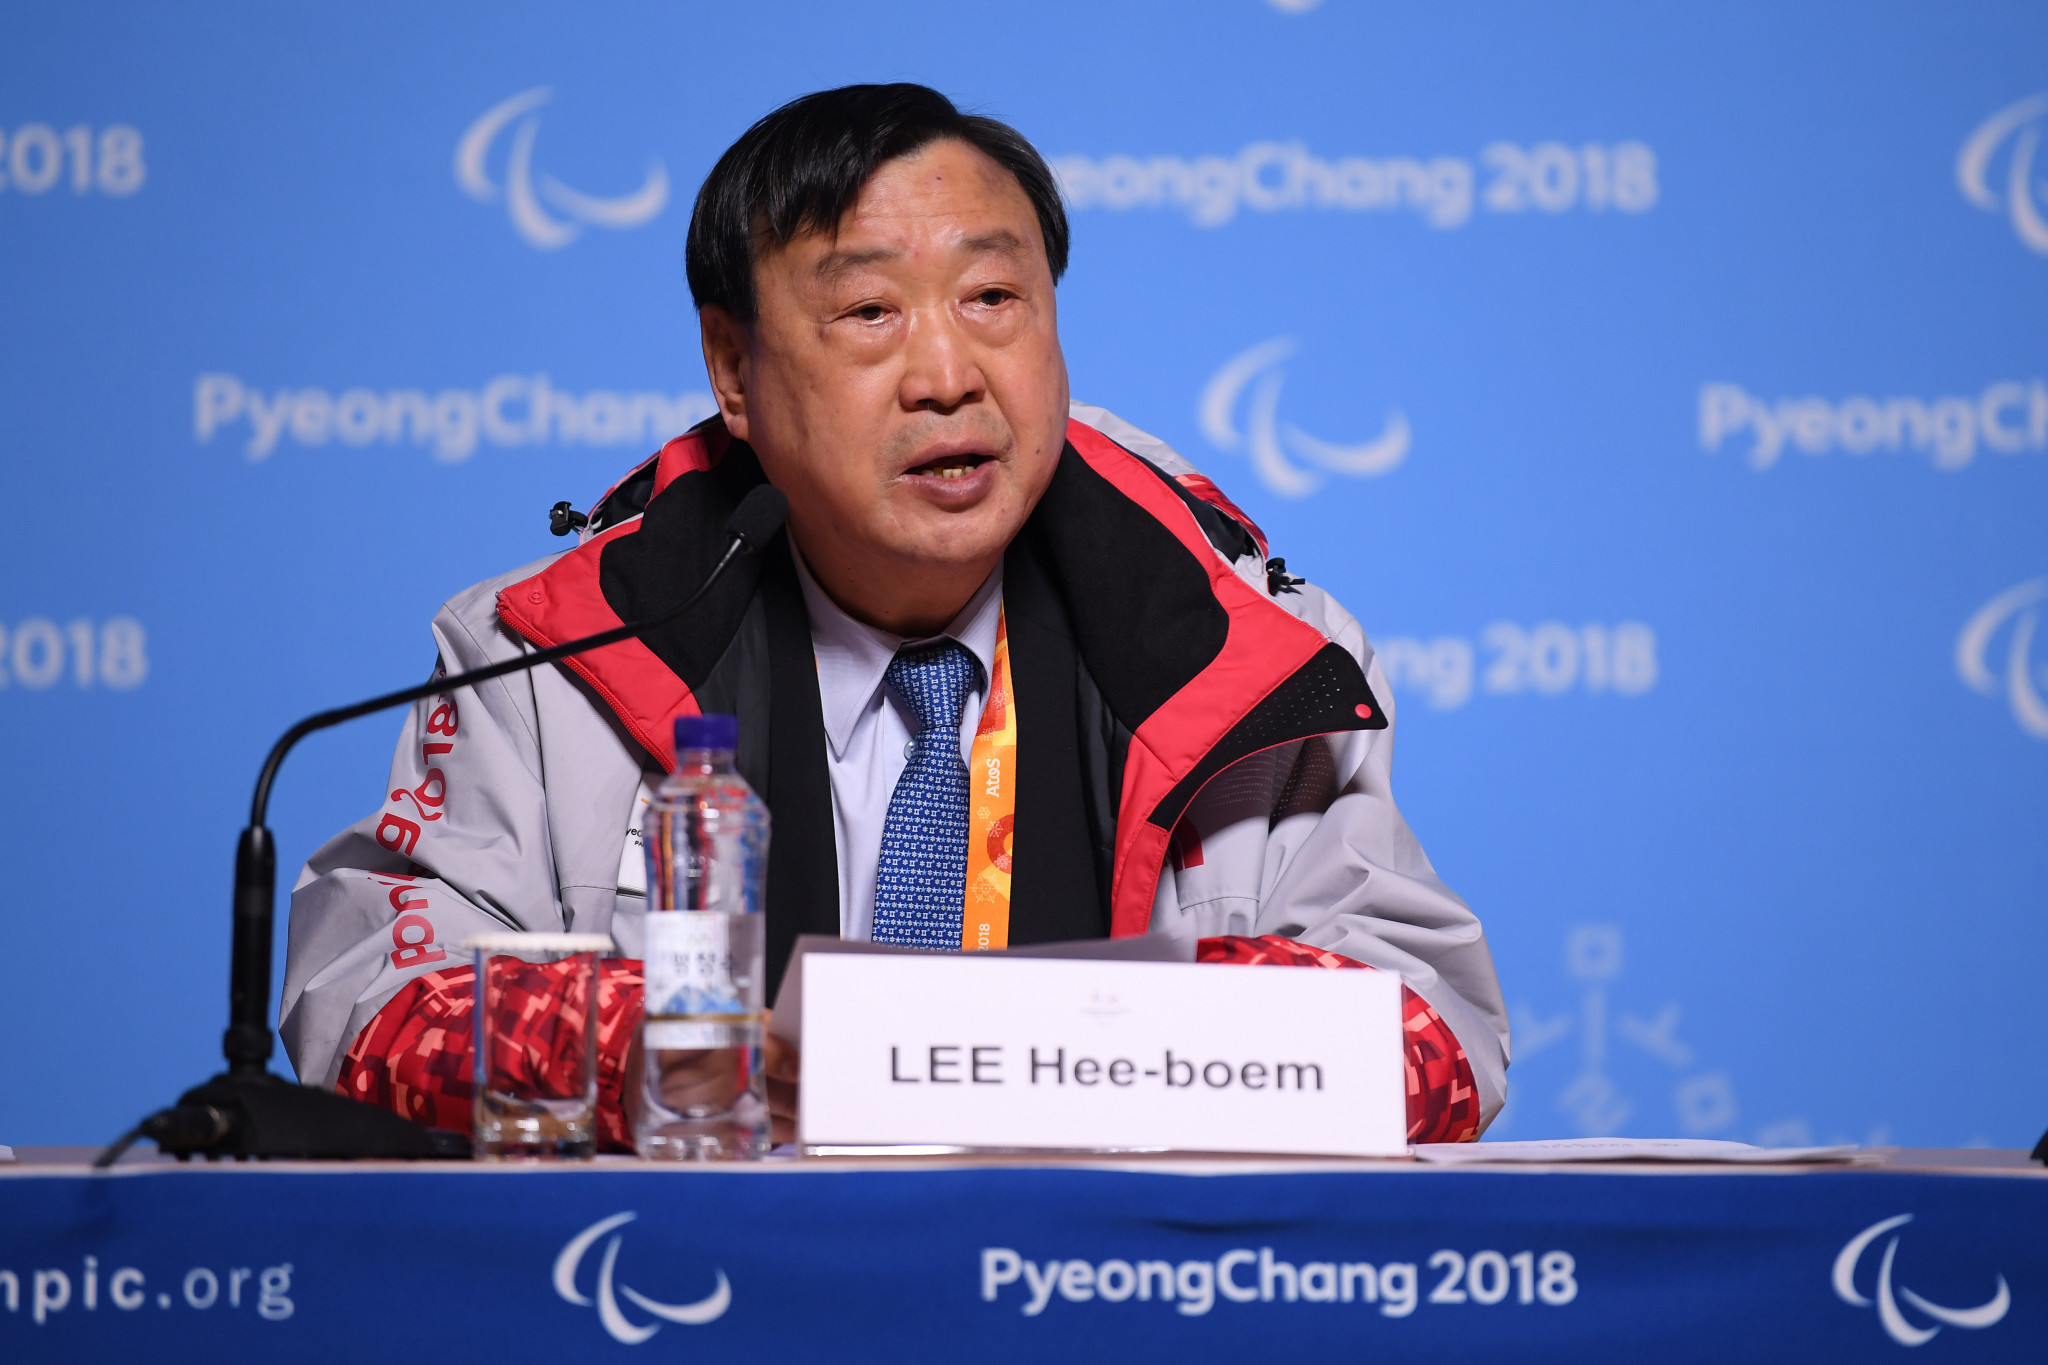 Pyeongchang 2018 President proud progress being made in talks between North and South Korea following Olympics